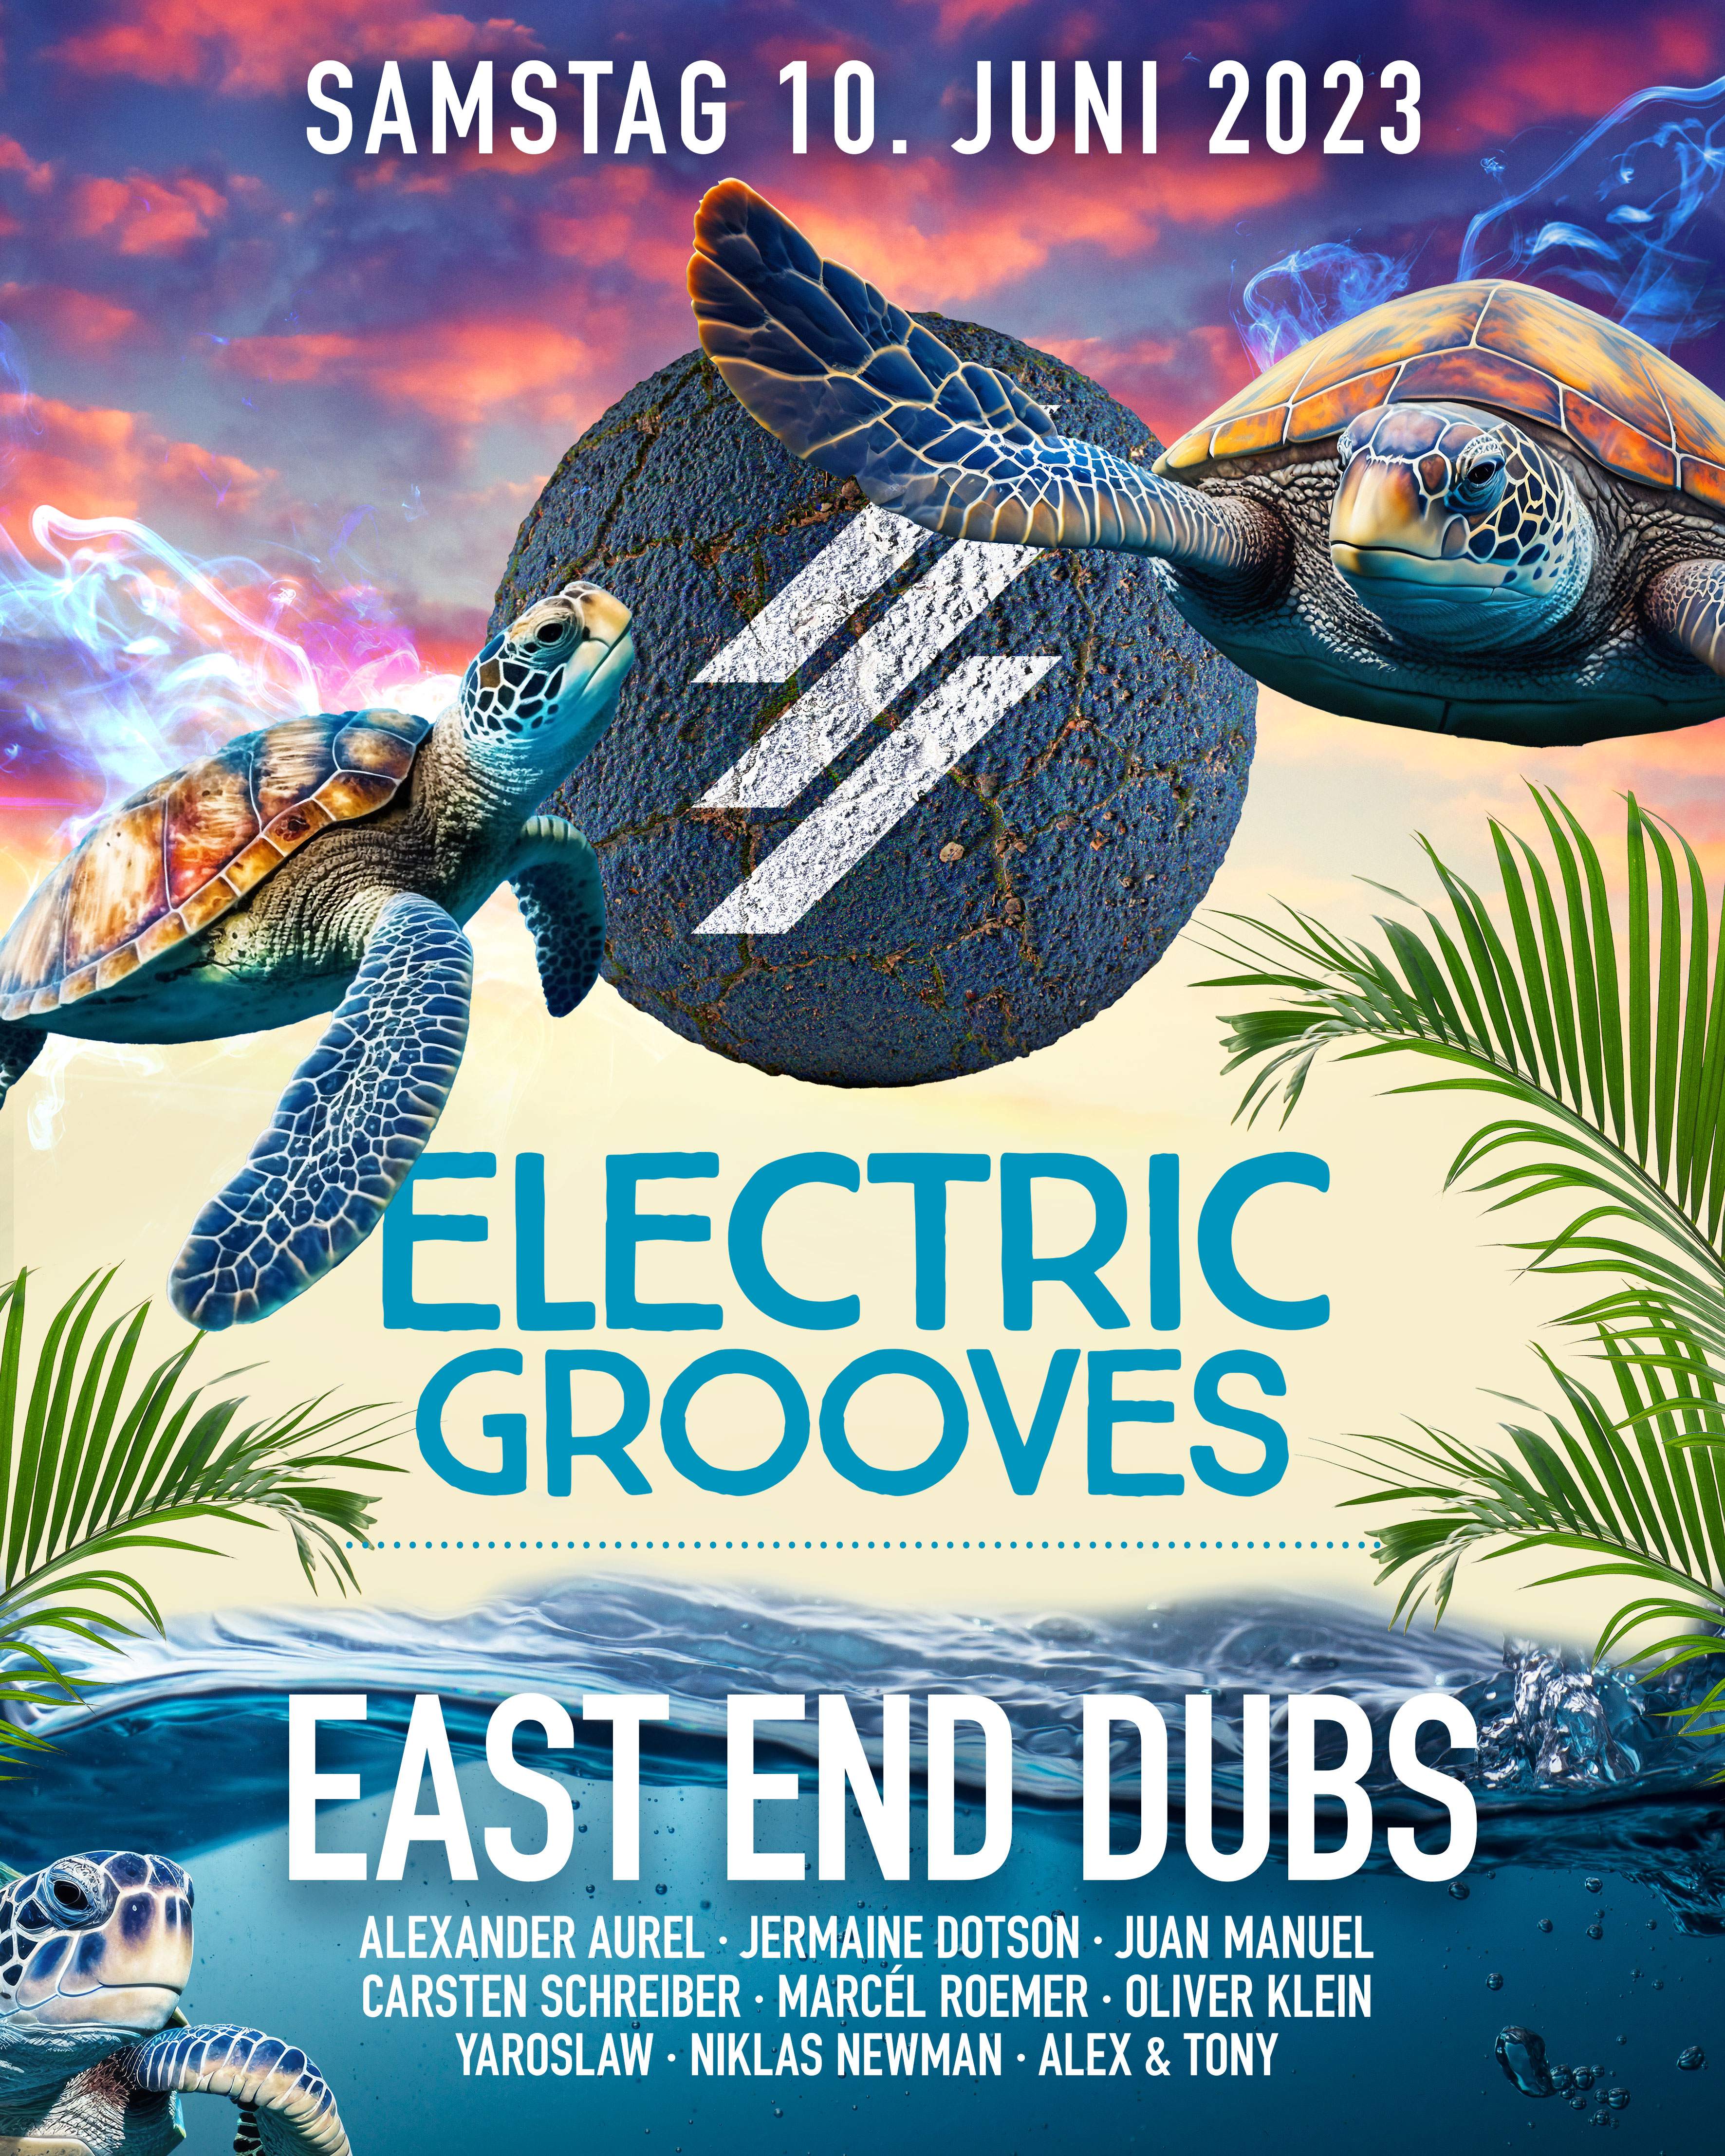 Electric Grooves with East End Dubs - Página frontal